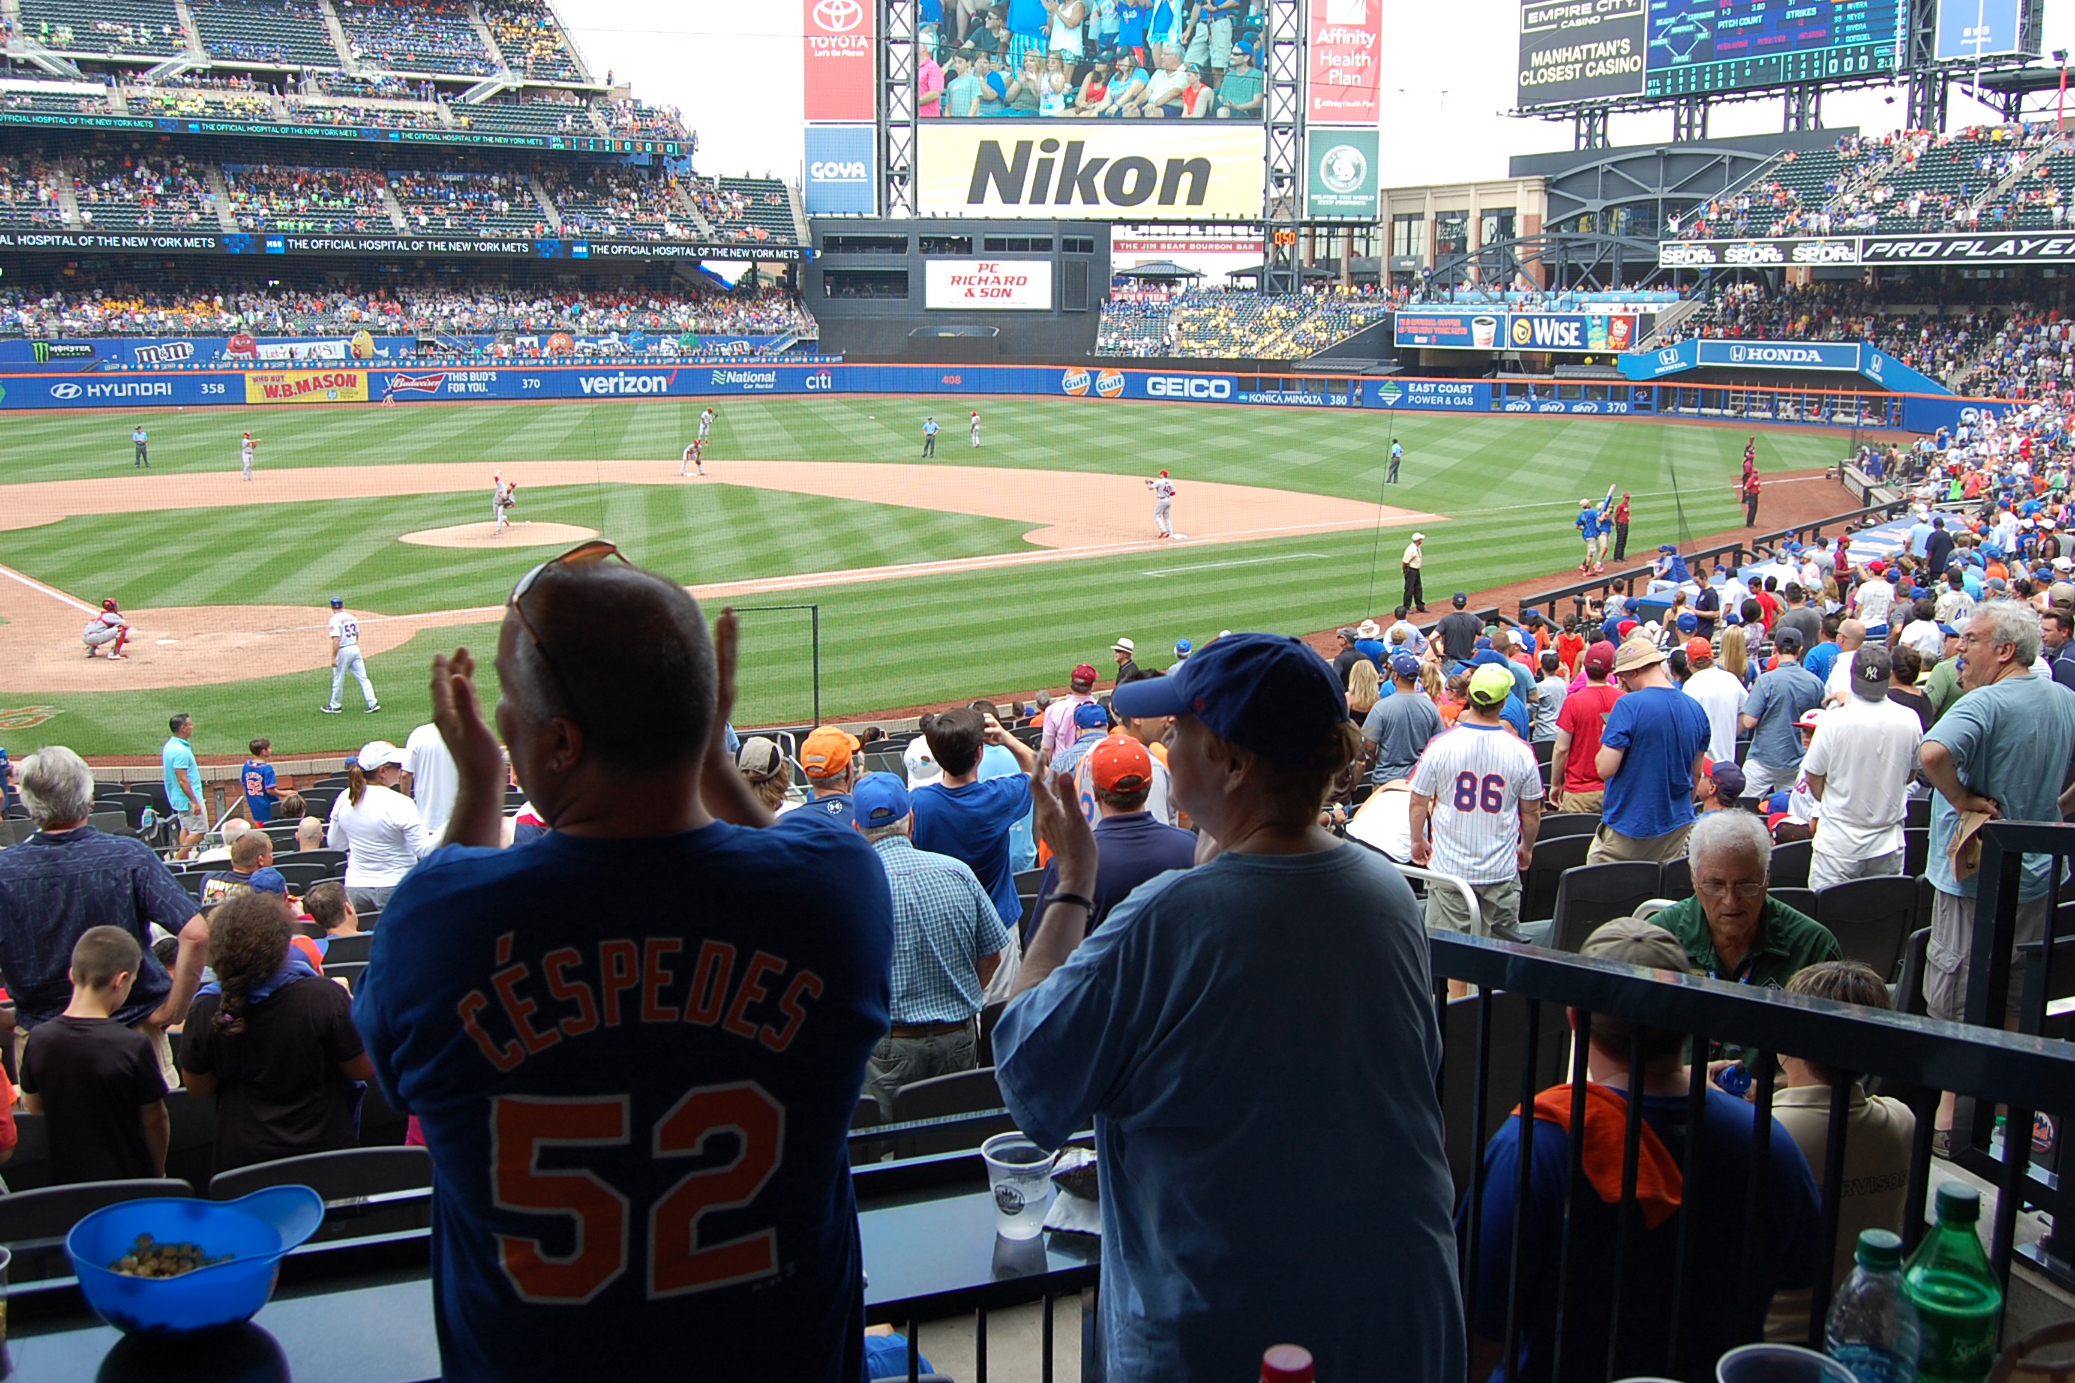 A participant in the River House Baseball Reminiscence Program and her son cheer on the Mets at Citi Field. (Kenneth Best/UConn Photo)